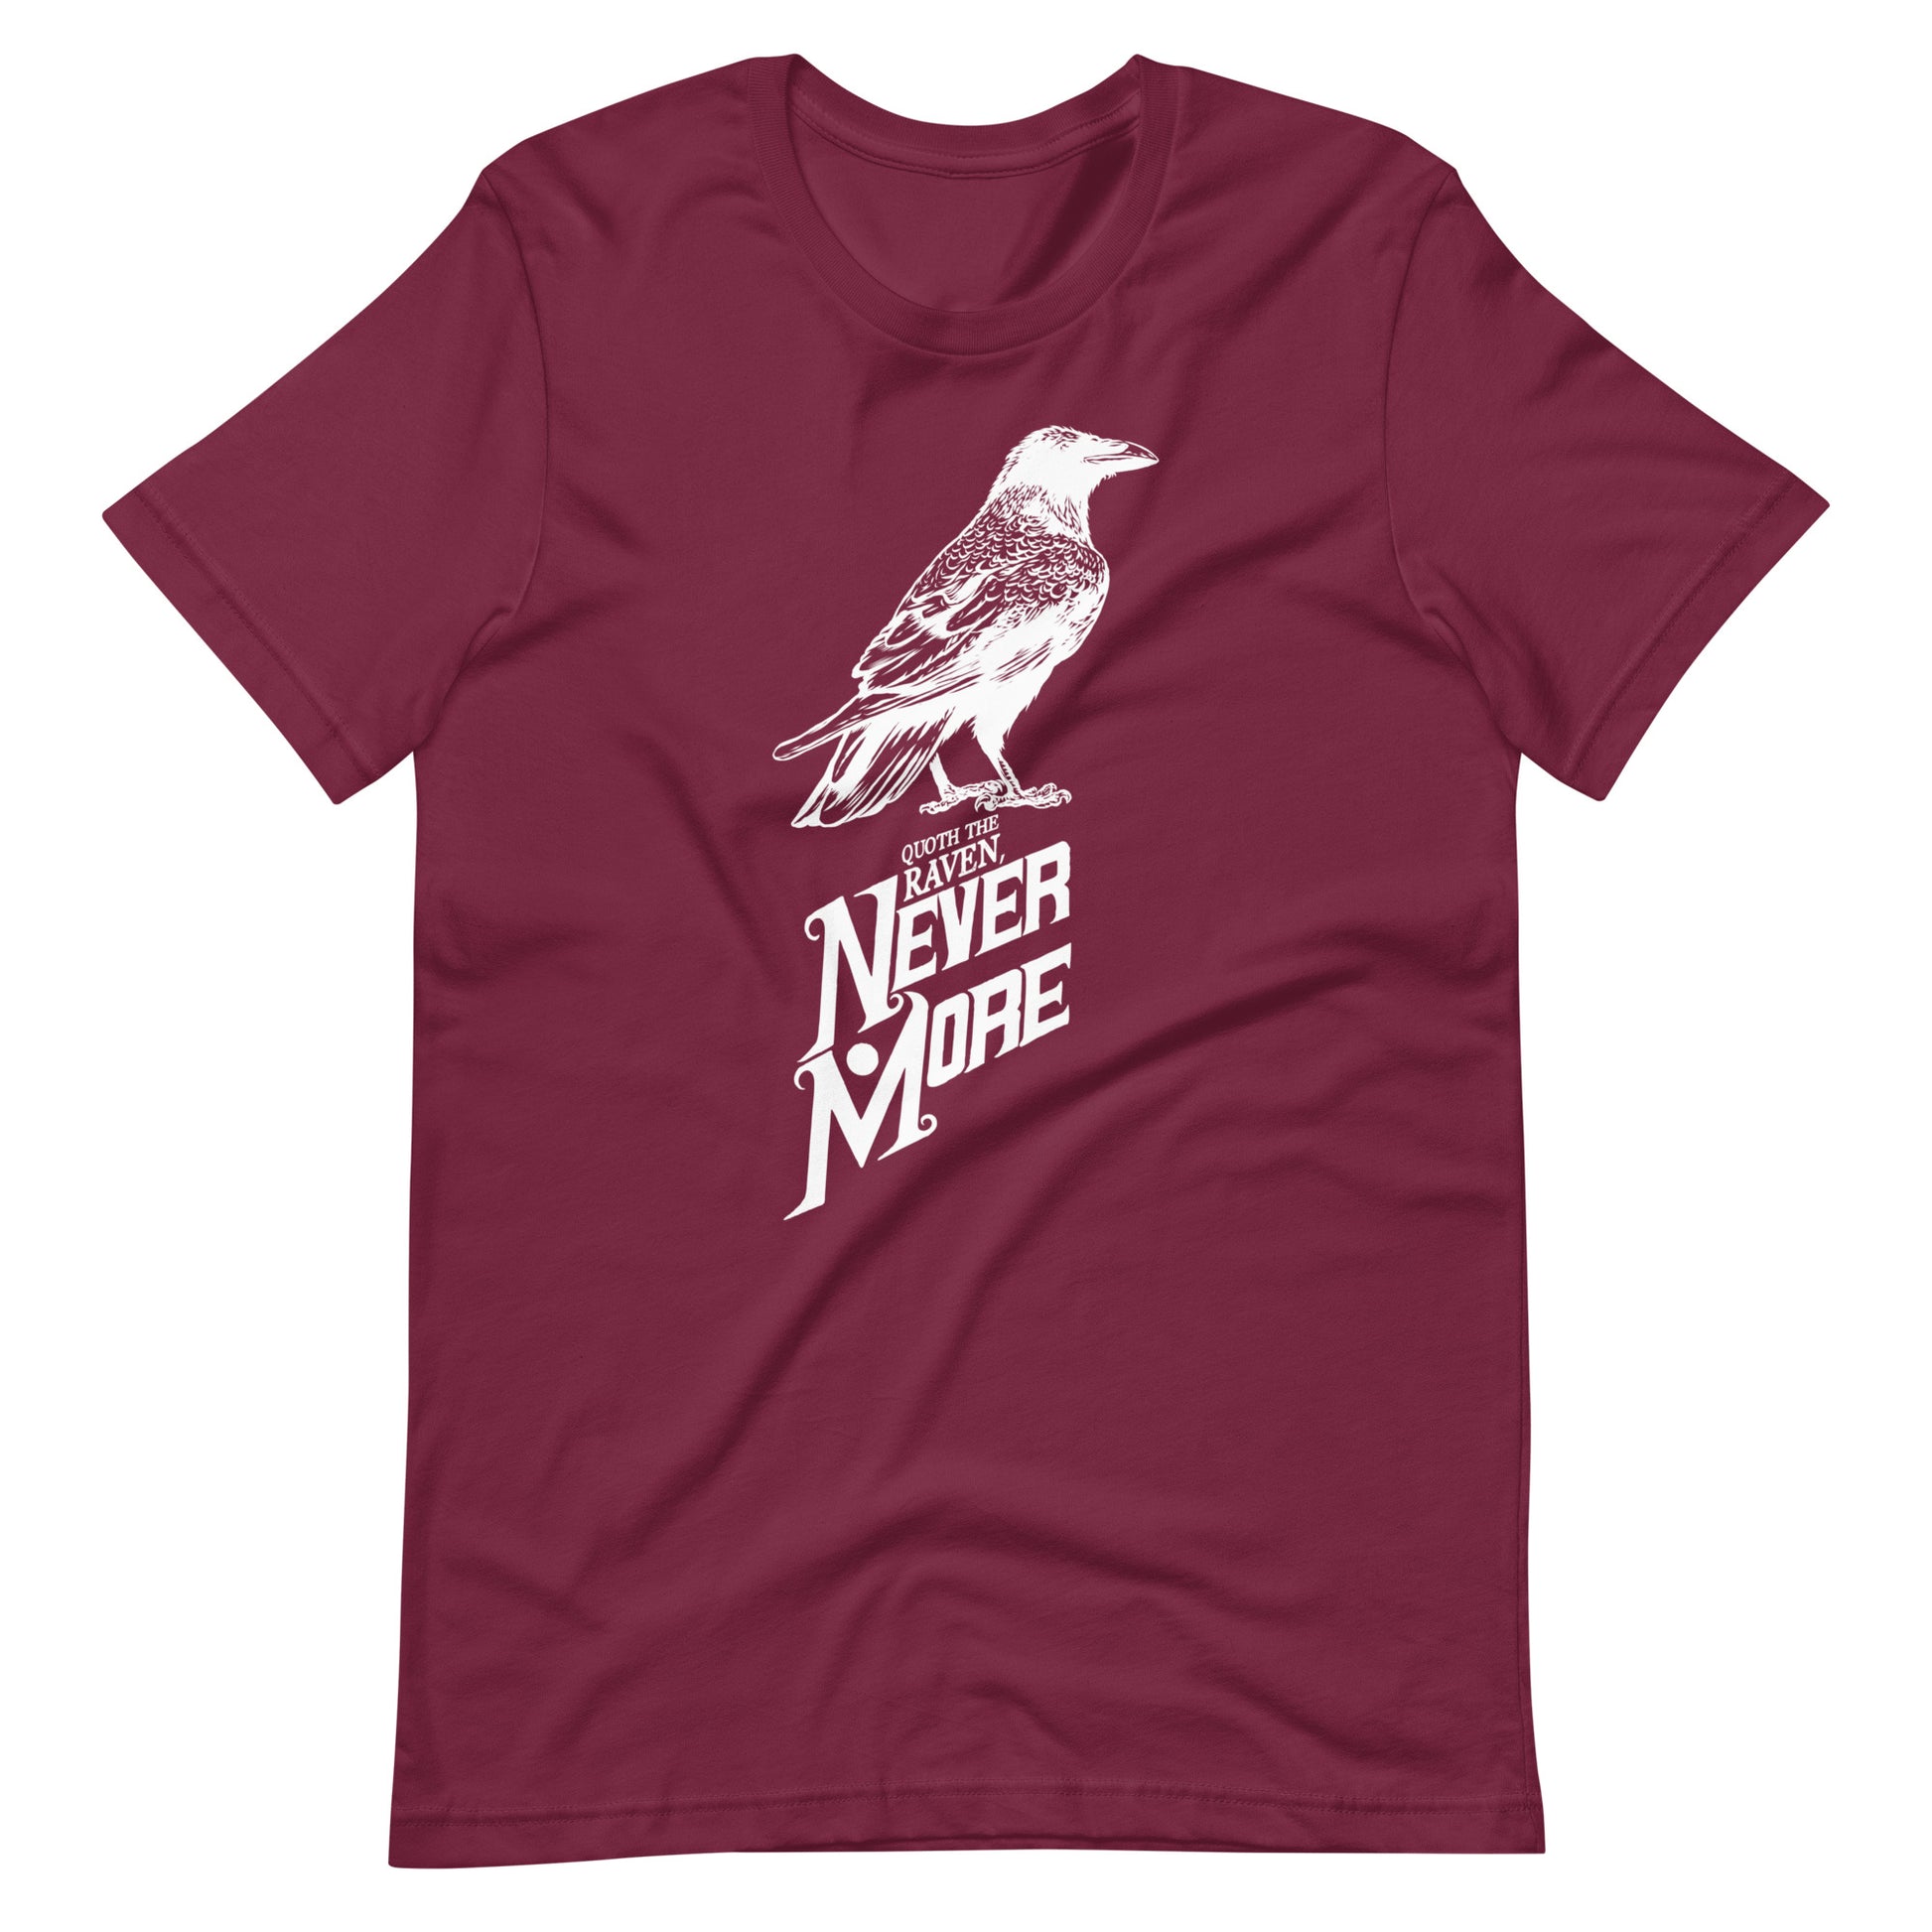 Quoth the Raven Nevermore - Men's t-shirt - Maroon Front